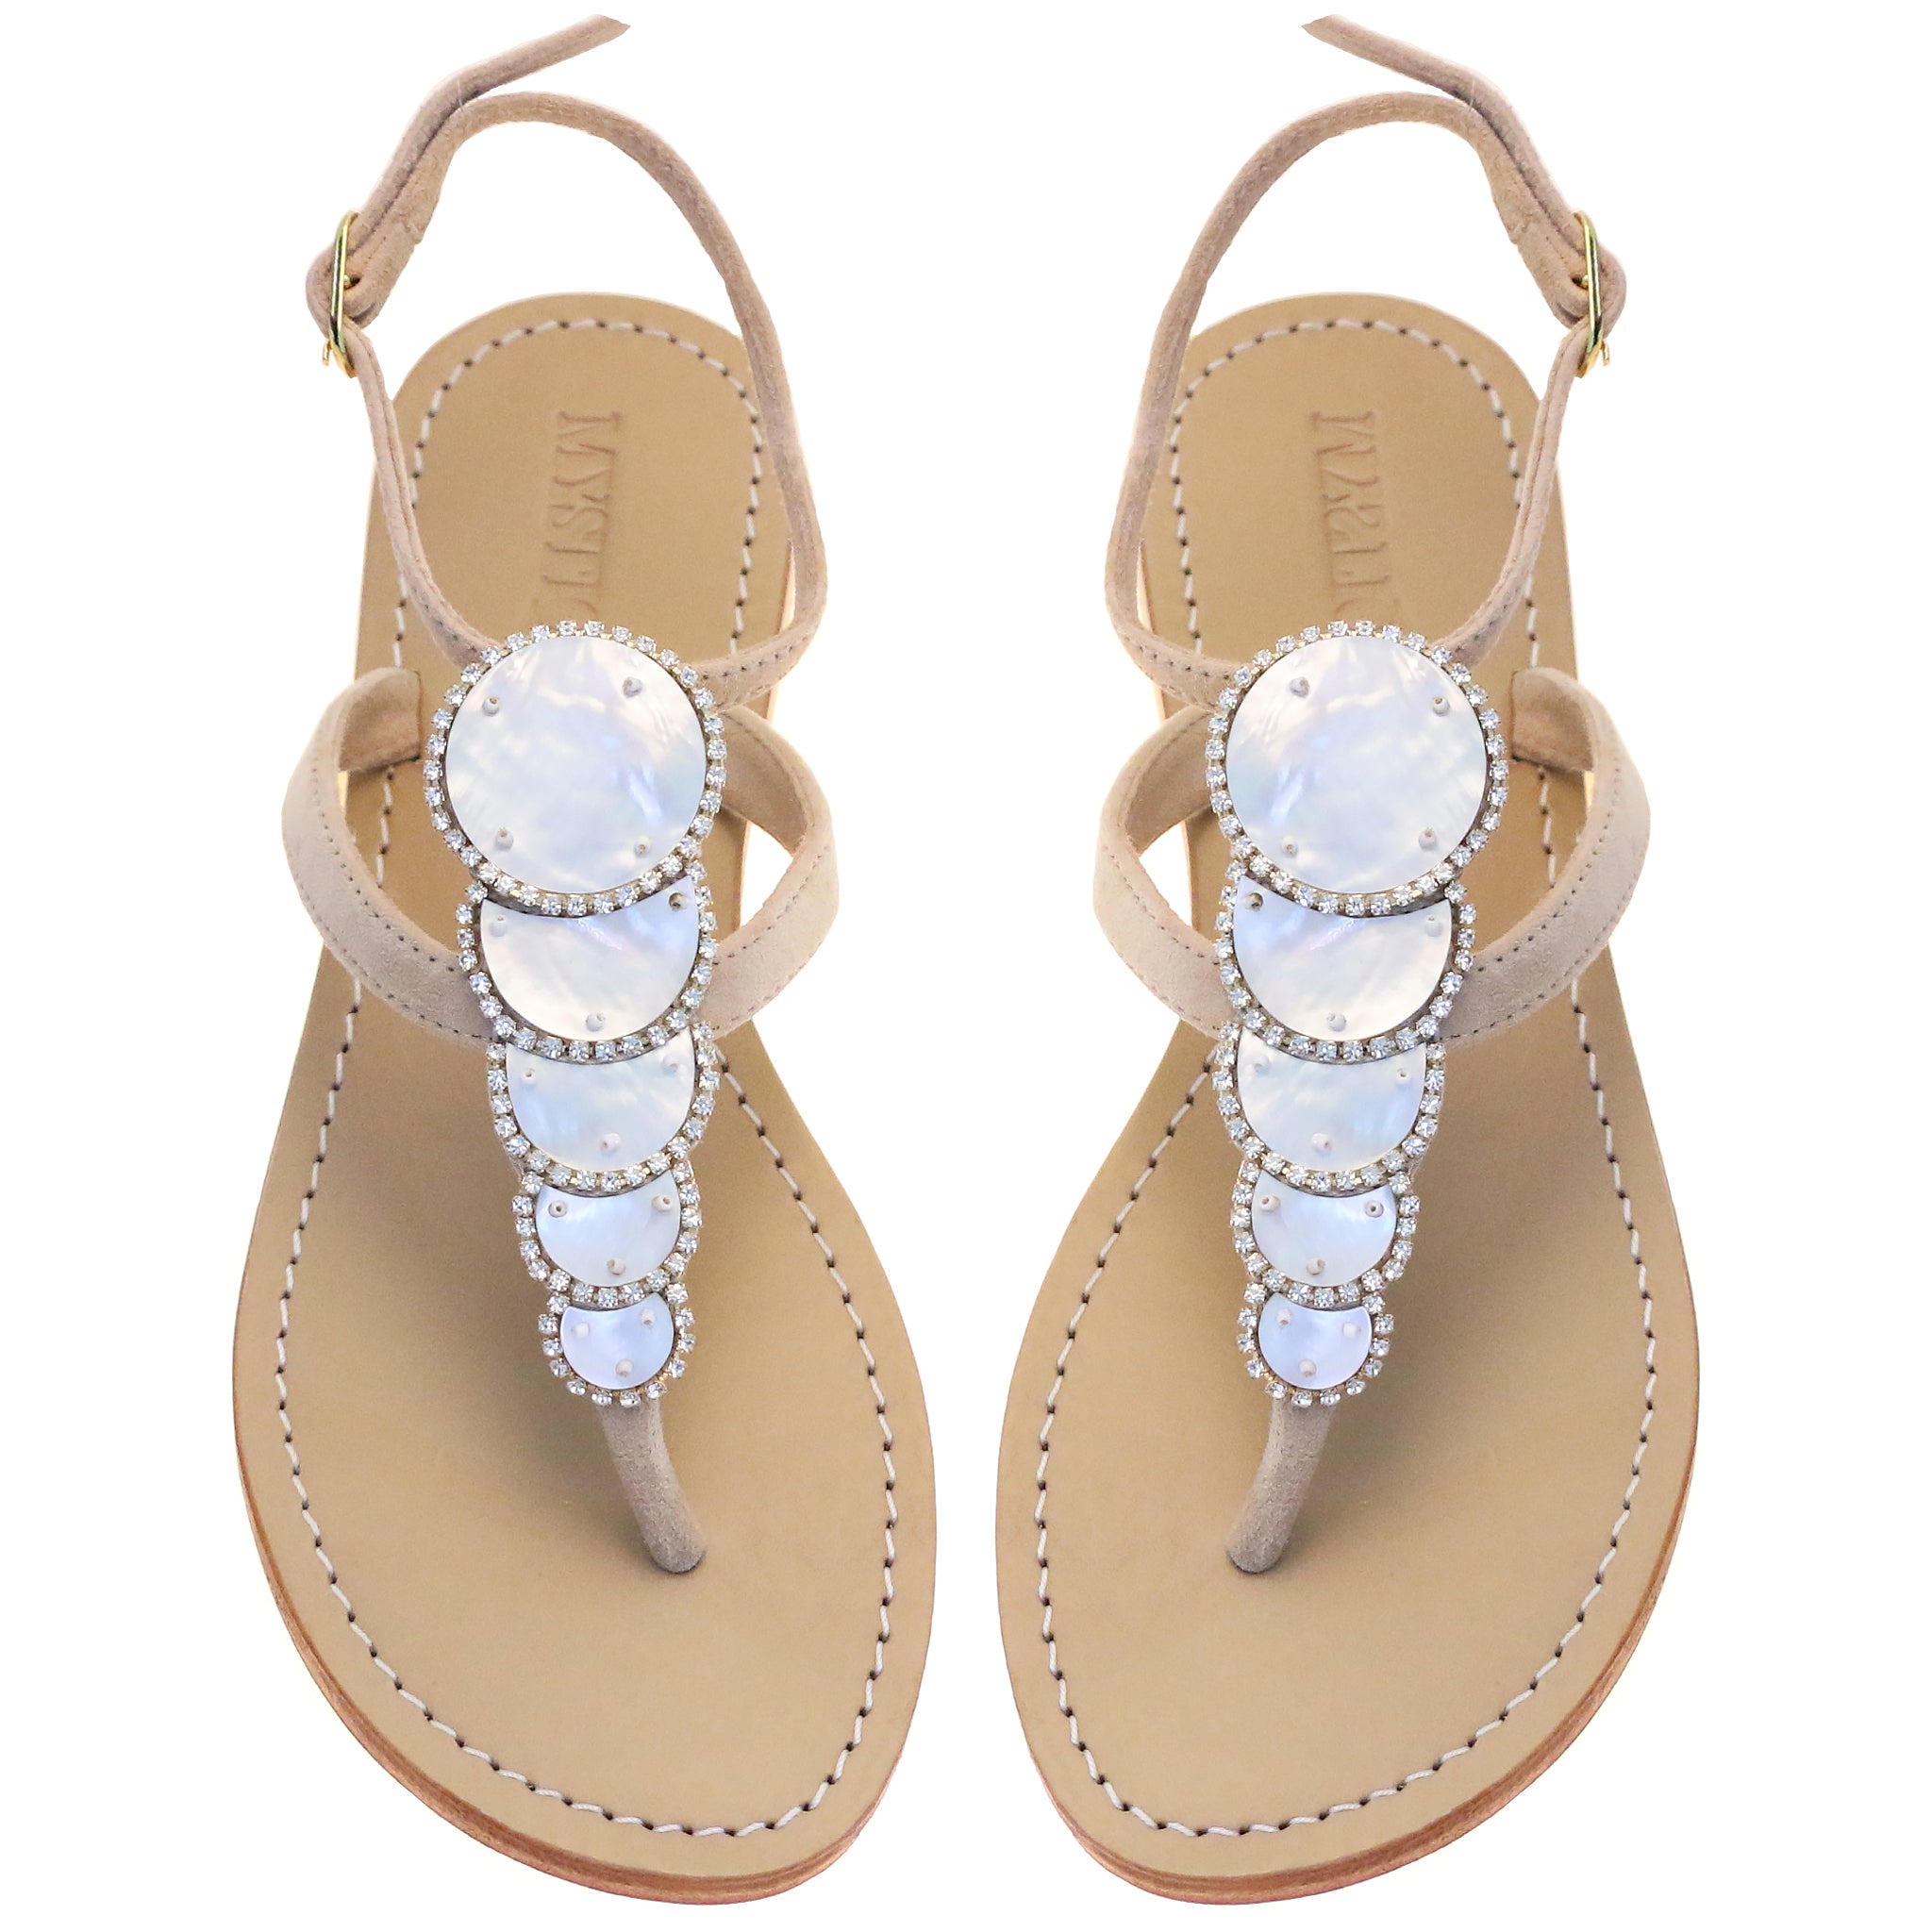 Sardinia - Women's Mother of Pearl Leather Sandals | Mystique Sandals